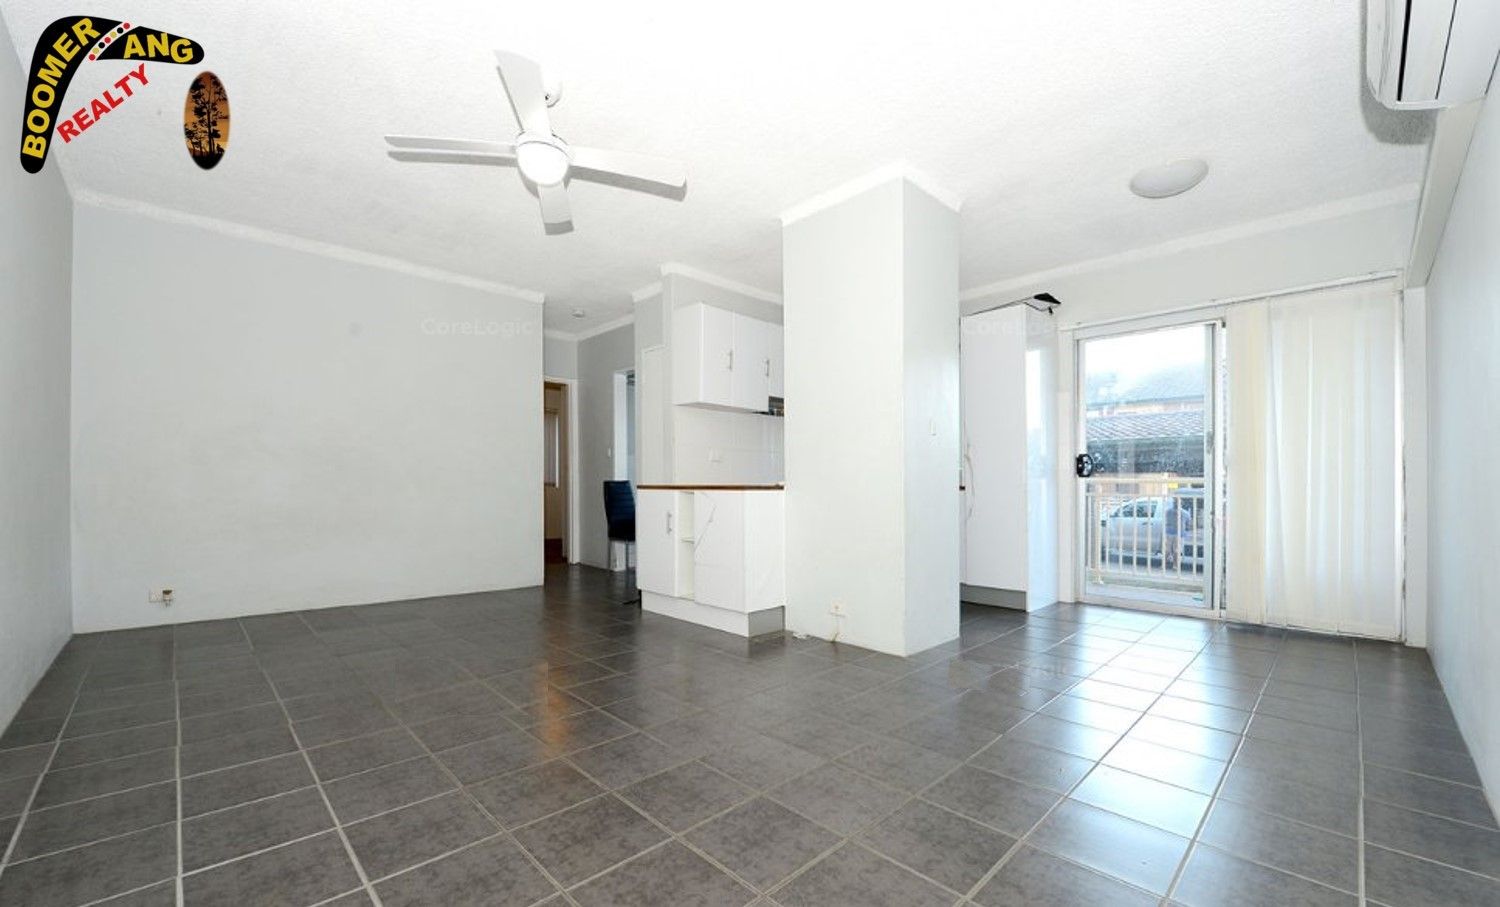 2 bedrooms Apartment / Unit / Flat in 50/16 Derby St MINTO NSW, 2566